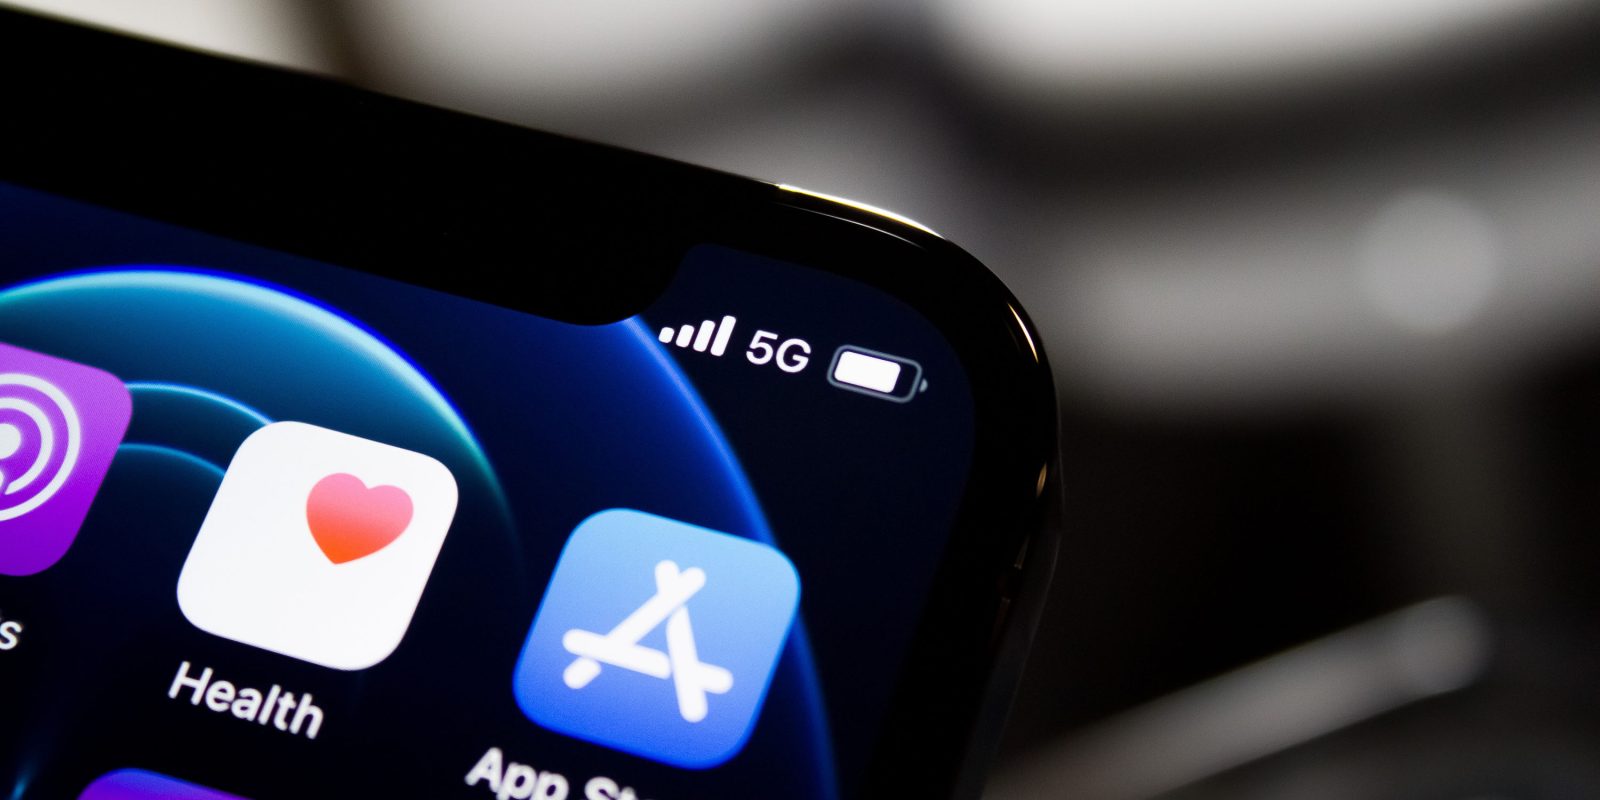 How much faster 5G since iPhone 12